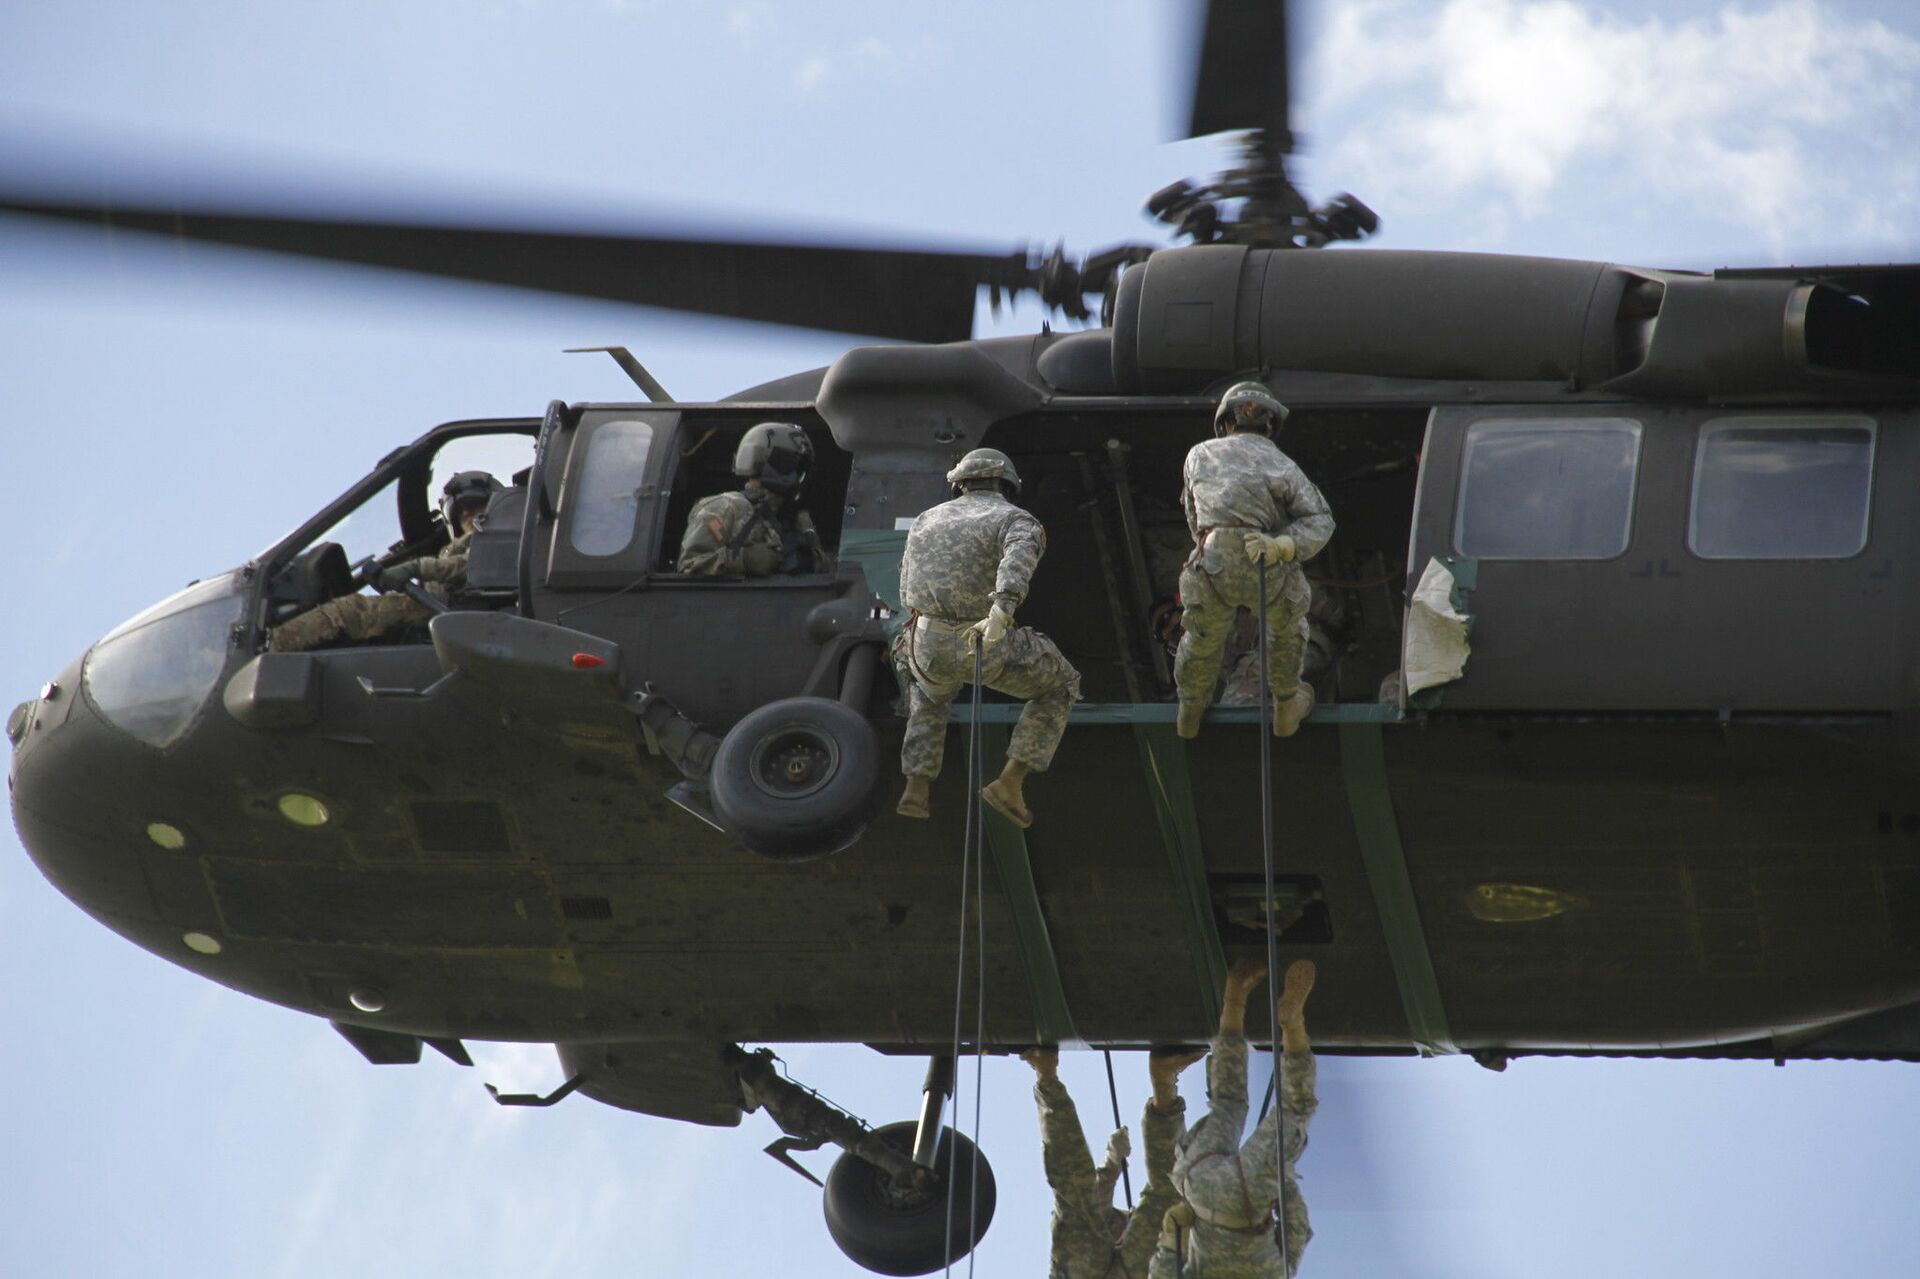 US Army Soldiers conduct rappel training from a UH-60 Black Hawk helicopter at Fort Bliss, Texas, Aug. 23, 2016. - Sputnik International, 1920, 12.11.2021